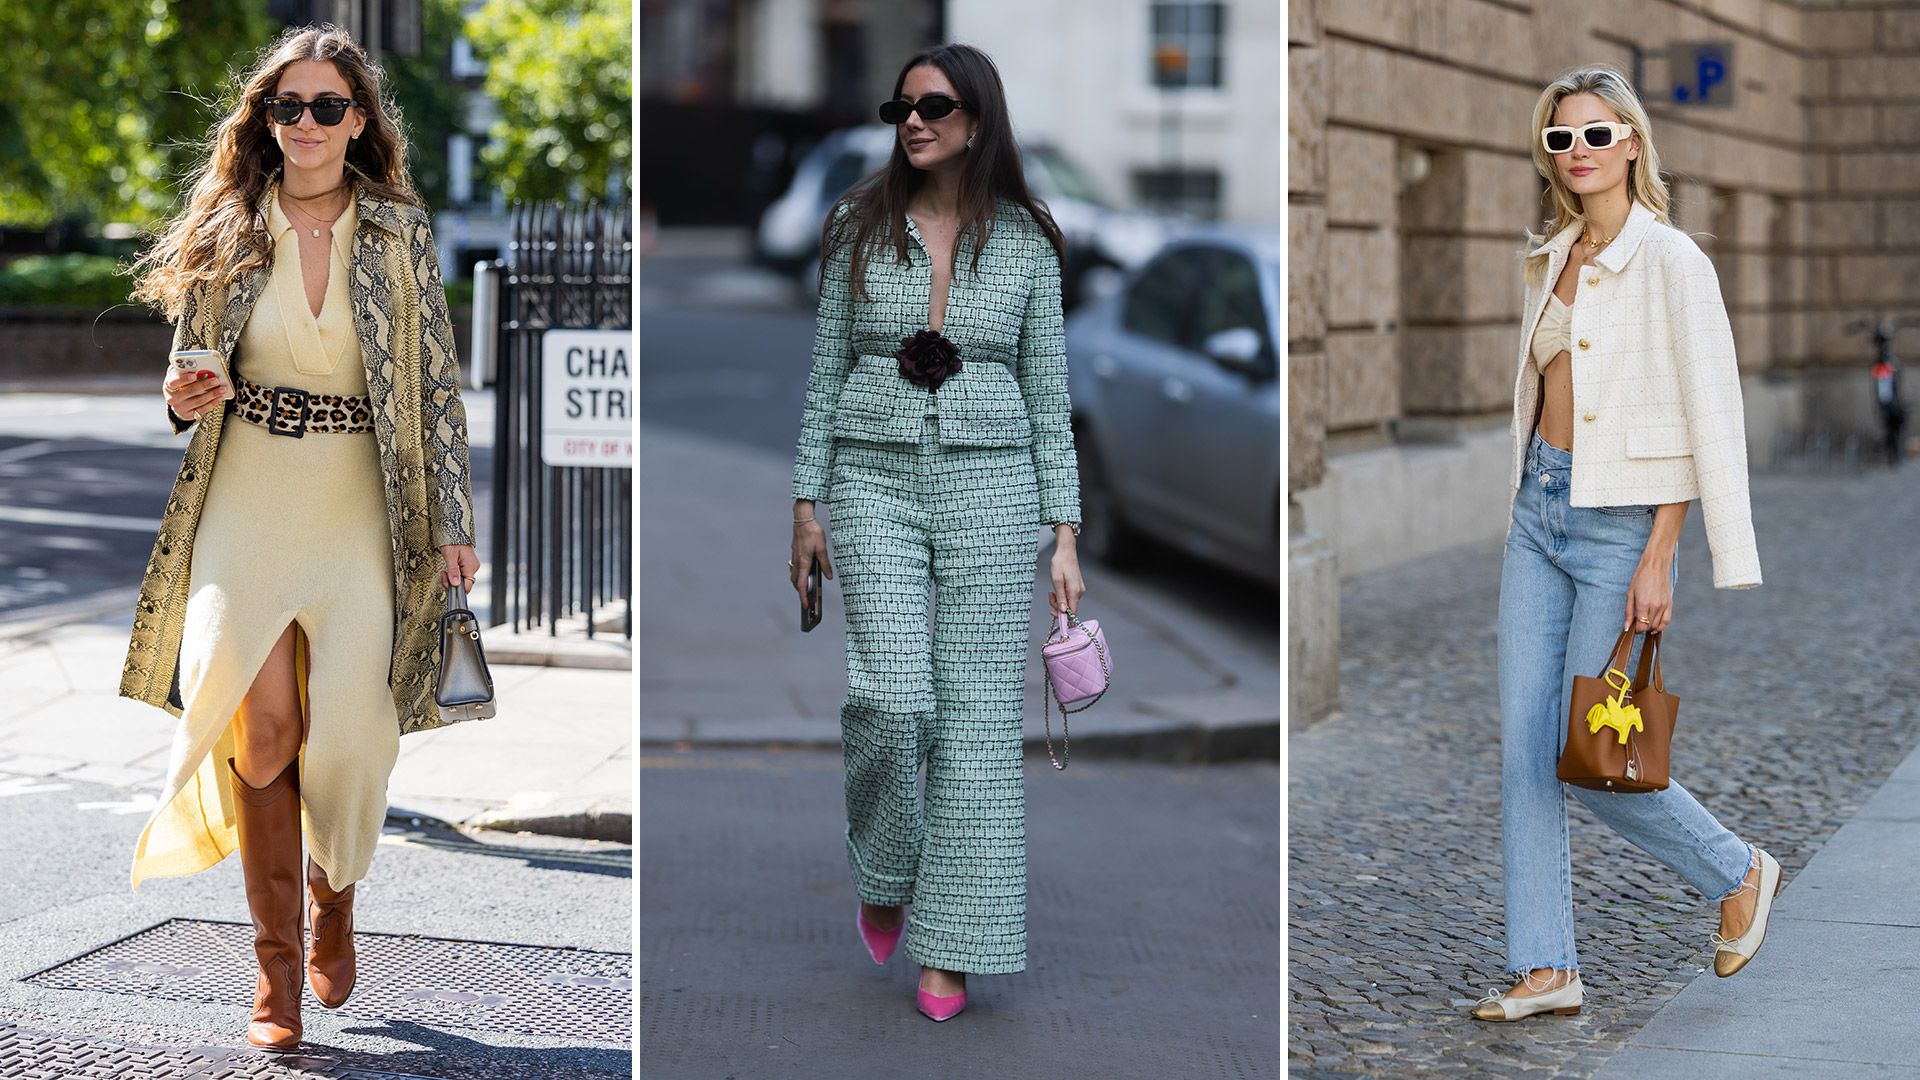 Three LFW guests on the streets of London wearing animal print, a floral corsage and ballet flats, respectively.